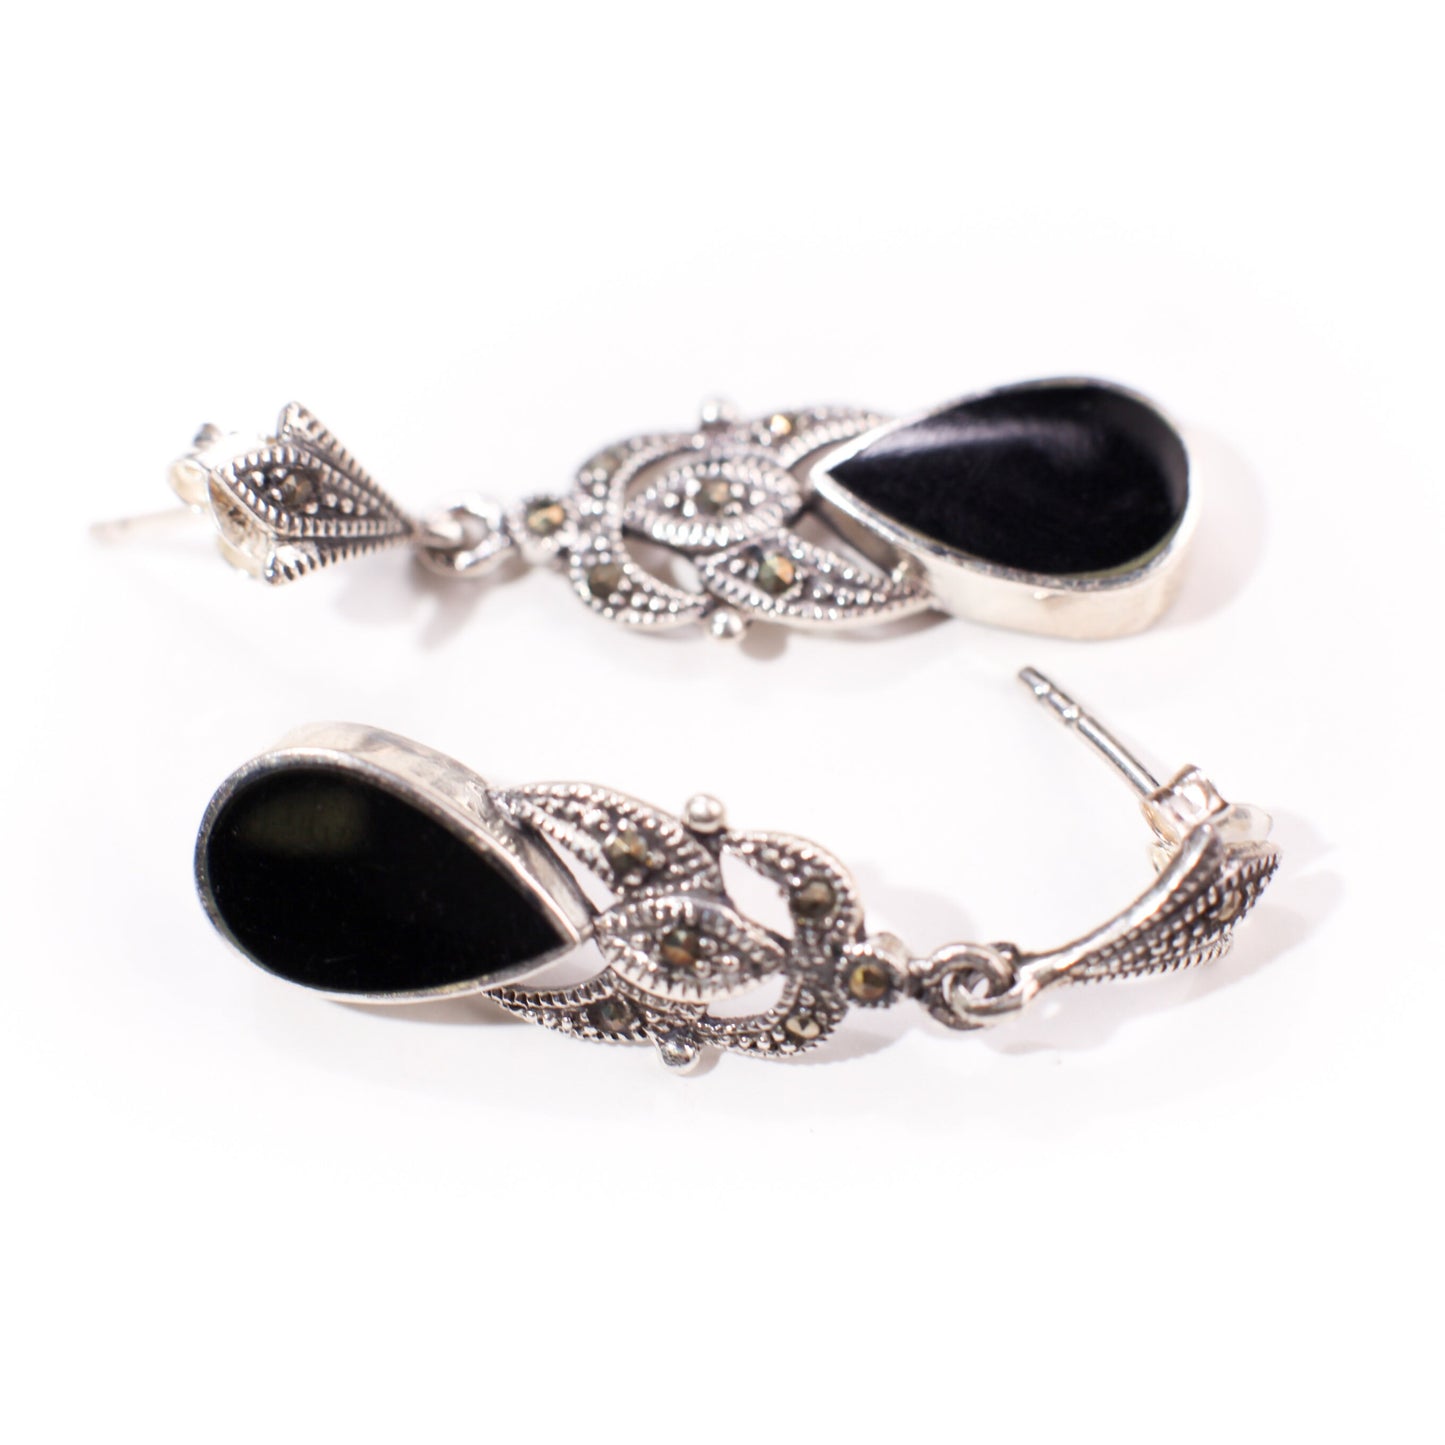 Marcasite 925 Sterling Silver Earrings Post with Teardrop Dangle Black Onyx, Vintage, Antique Marcasite Earrings Gift for her